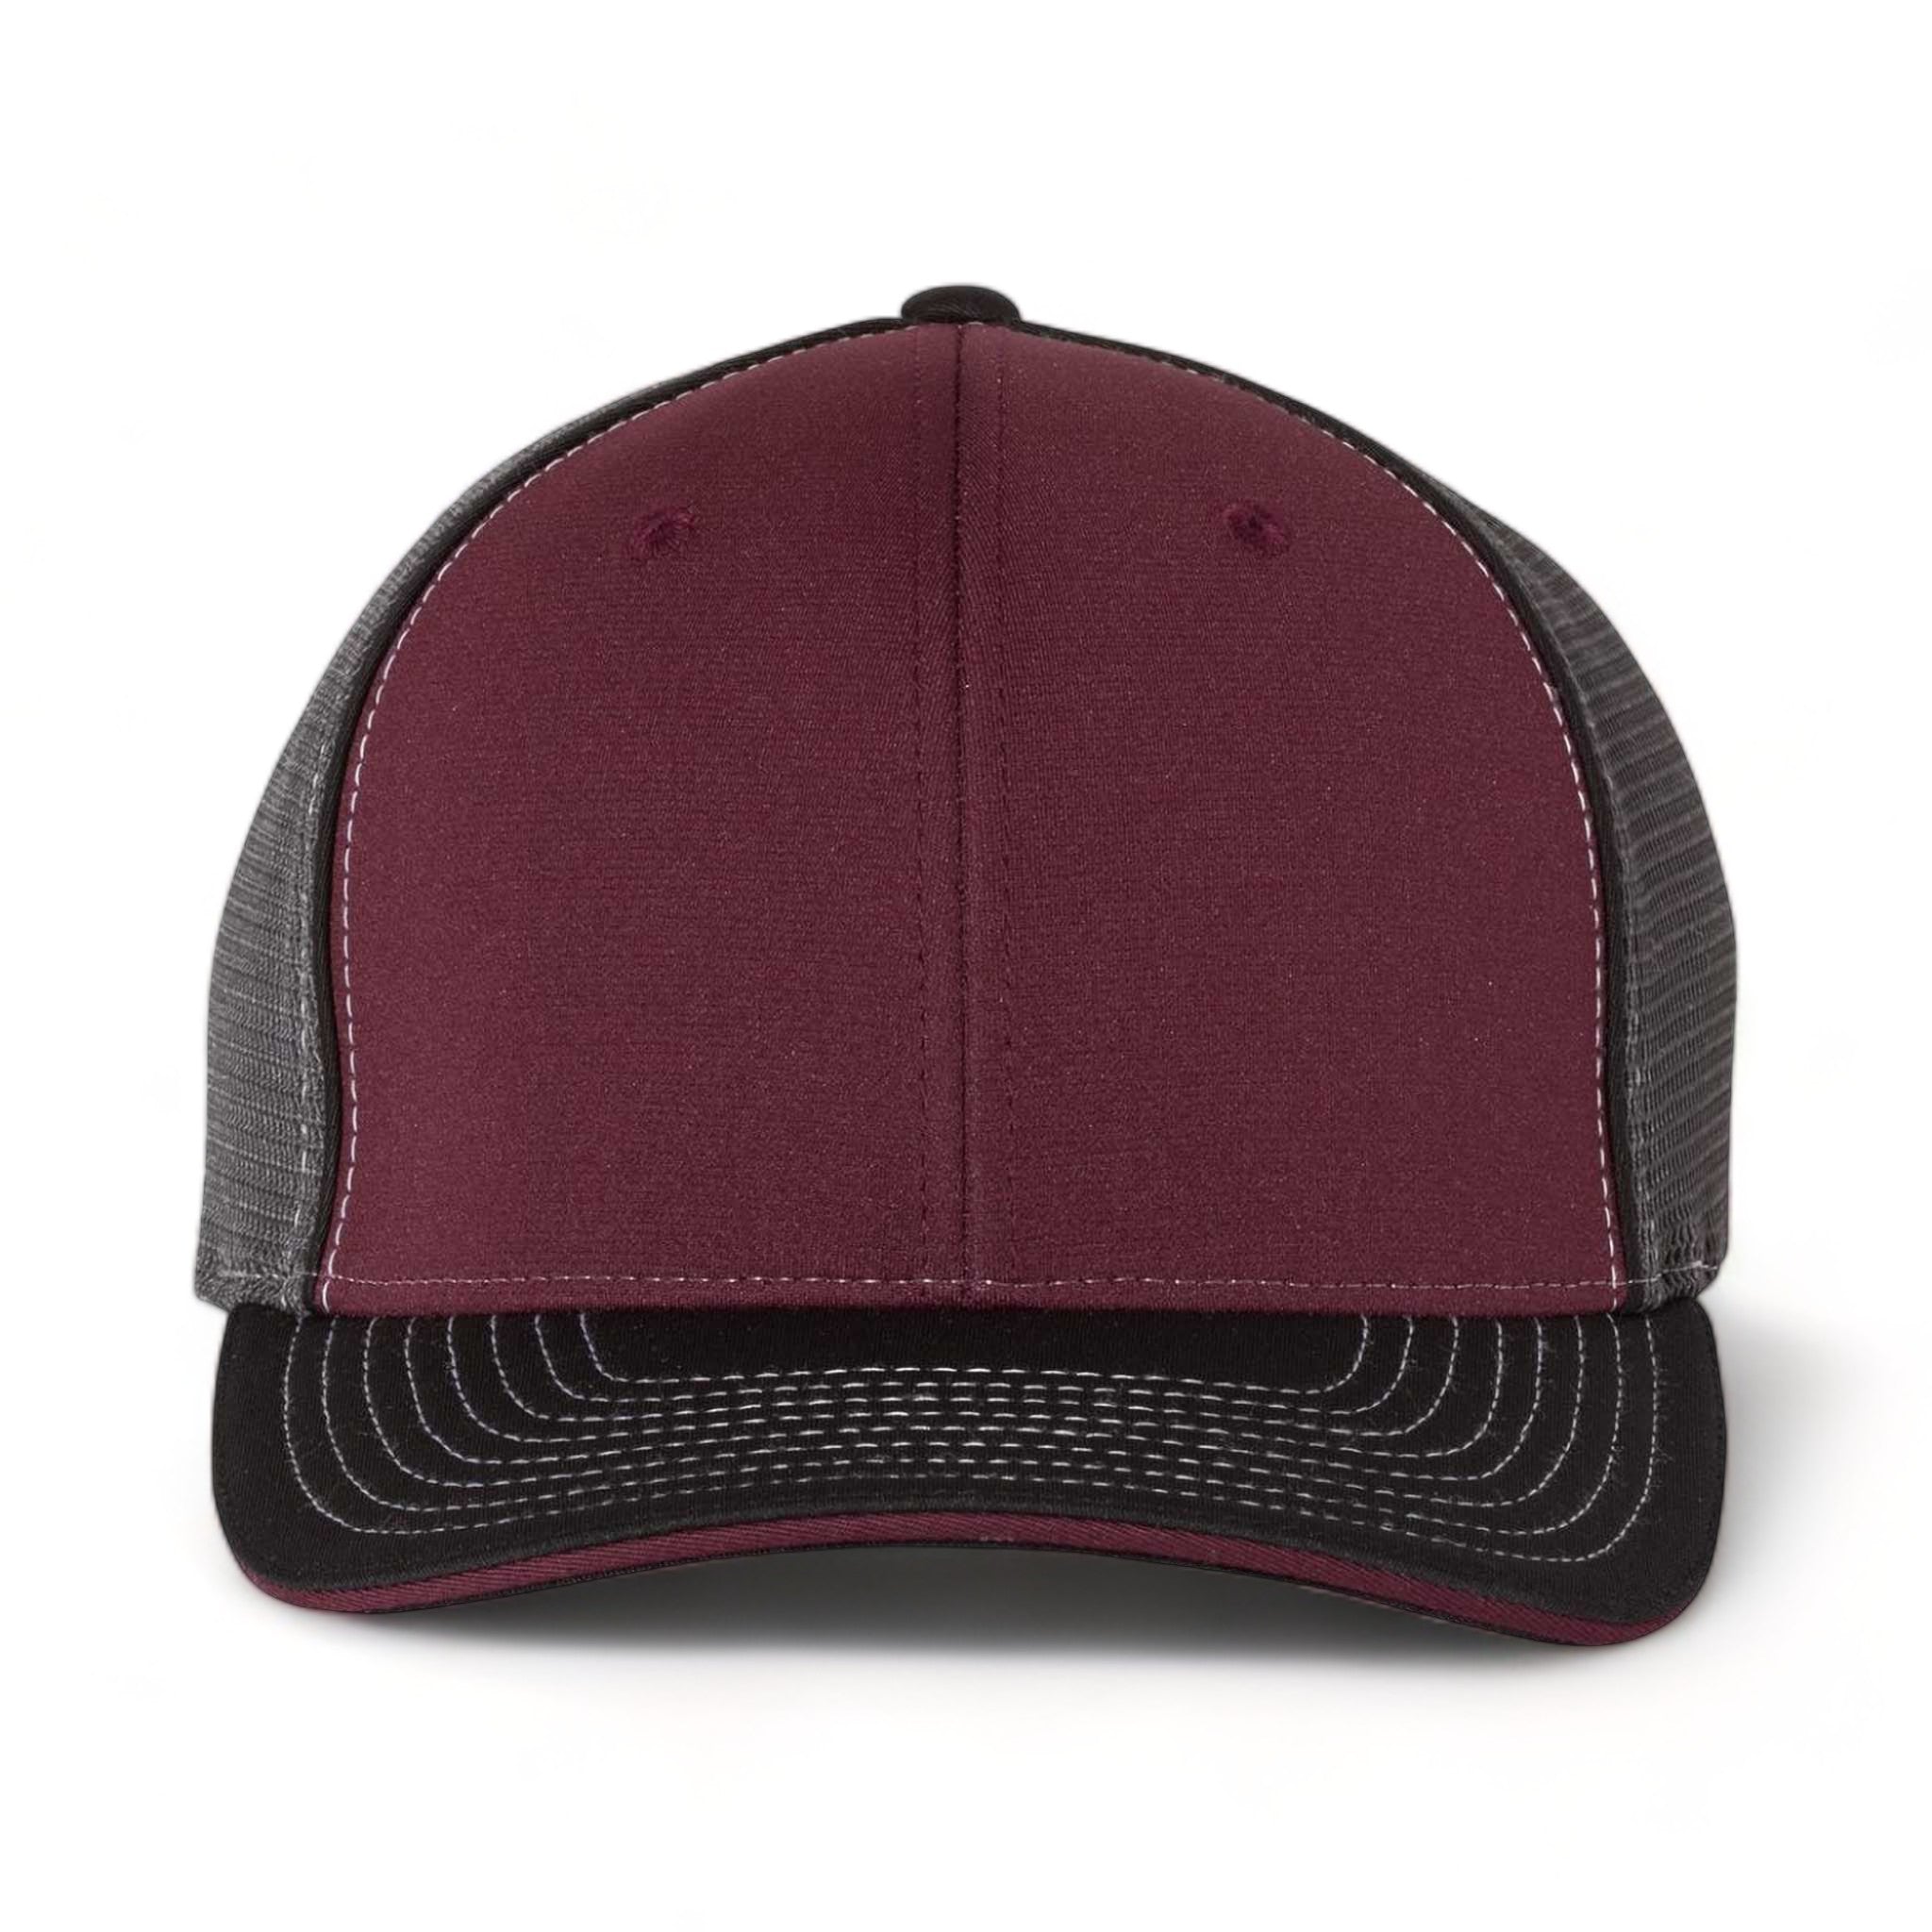 Front view of Richardson 172 custom hat in maroon, charcoal and black tri